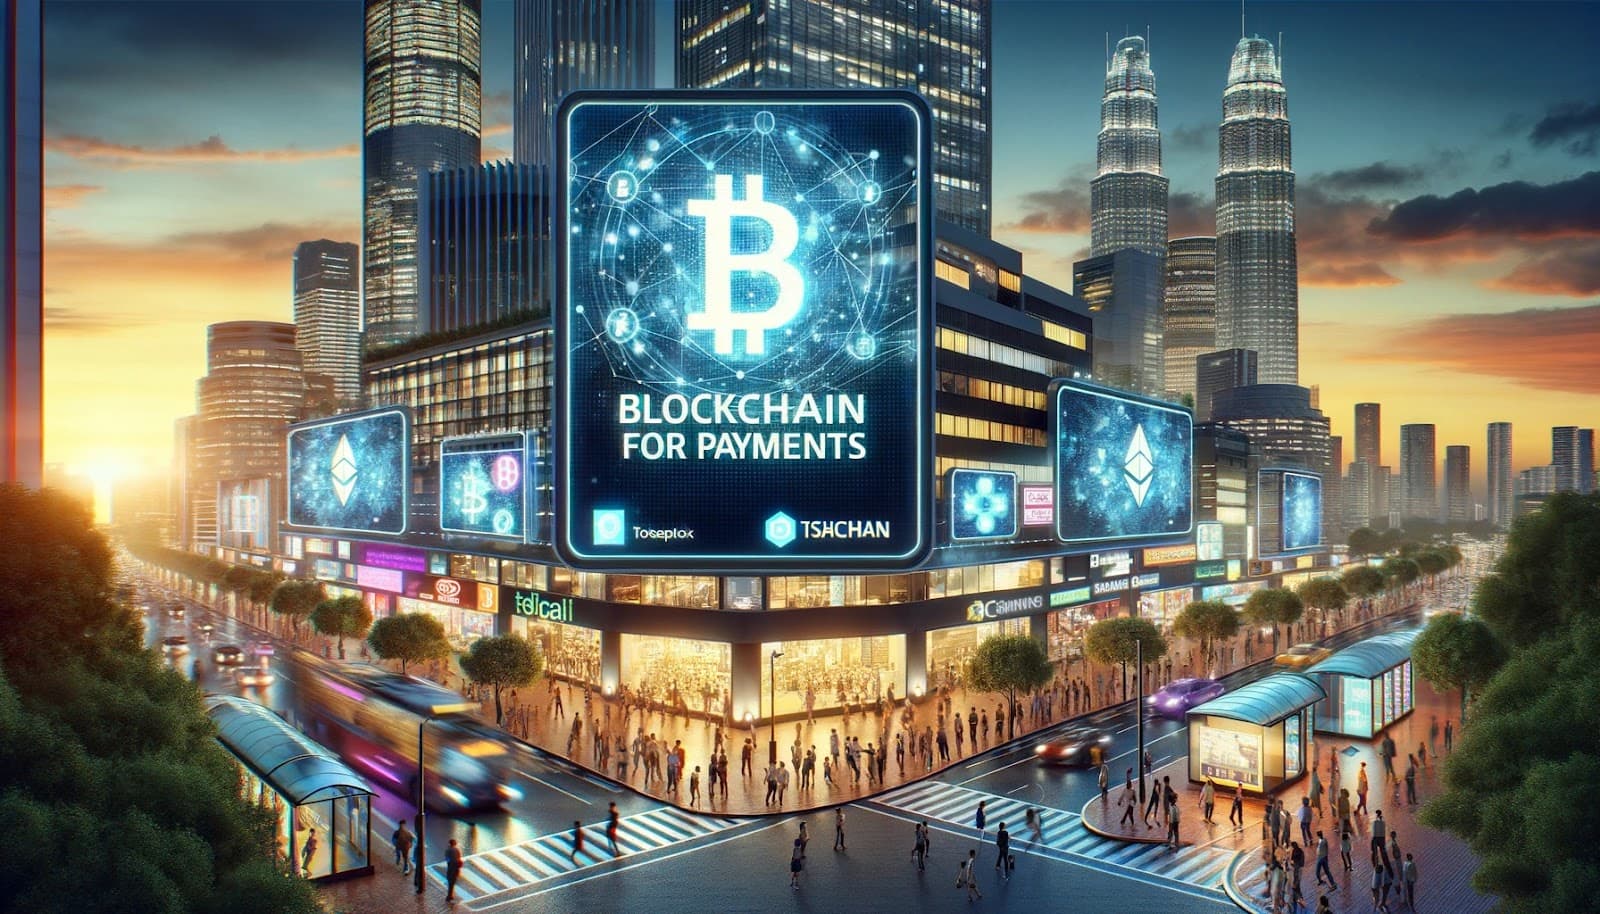 Sign with Bitcoin logo and the words "Blockchain for Payments"